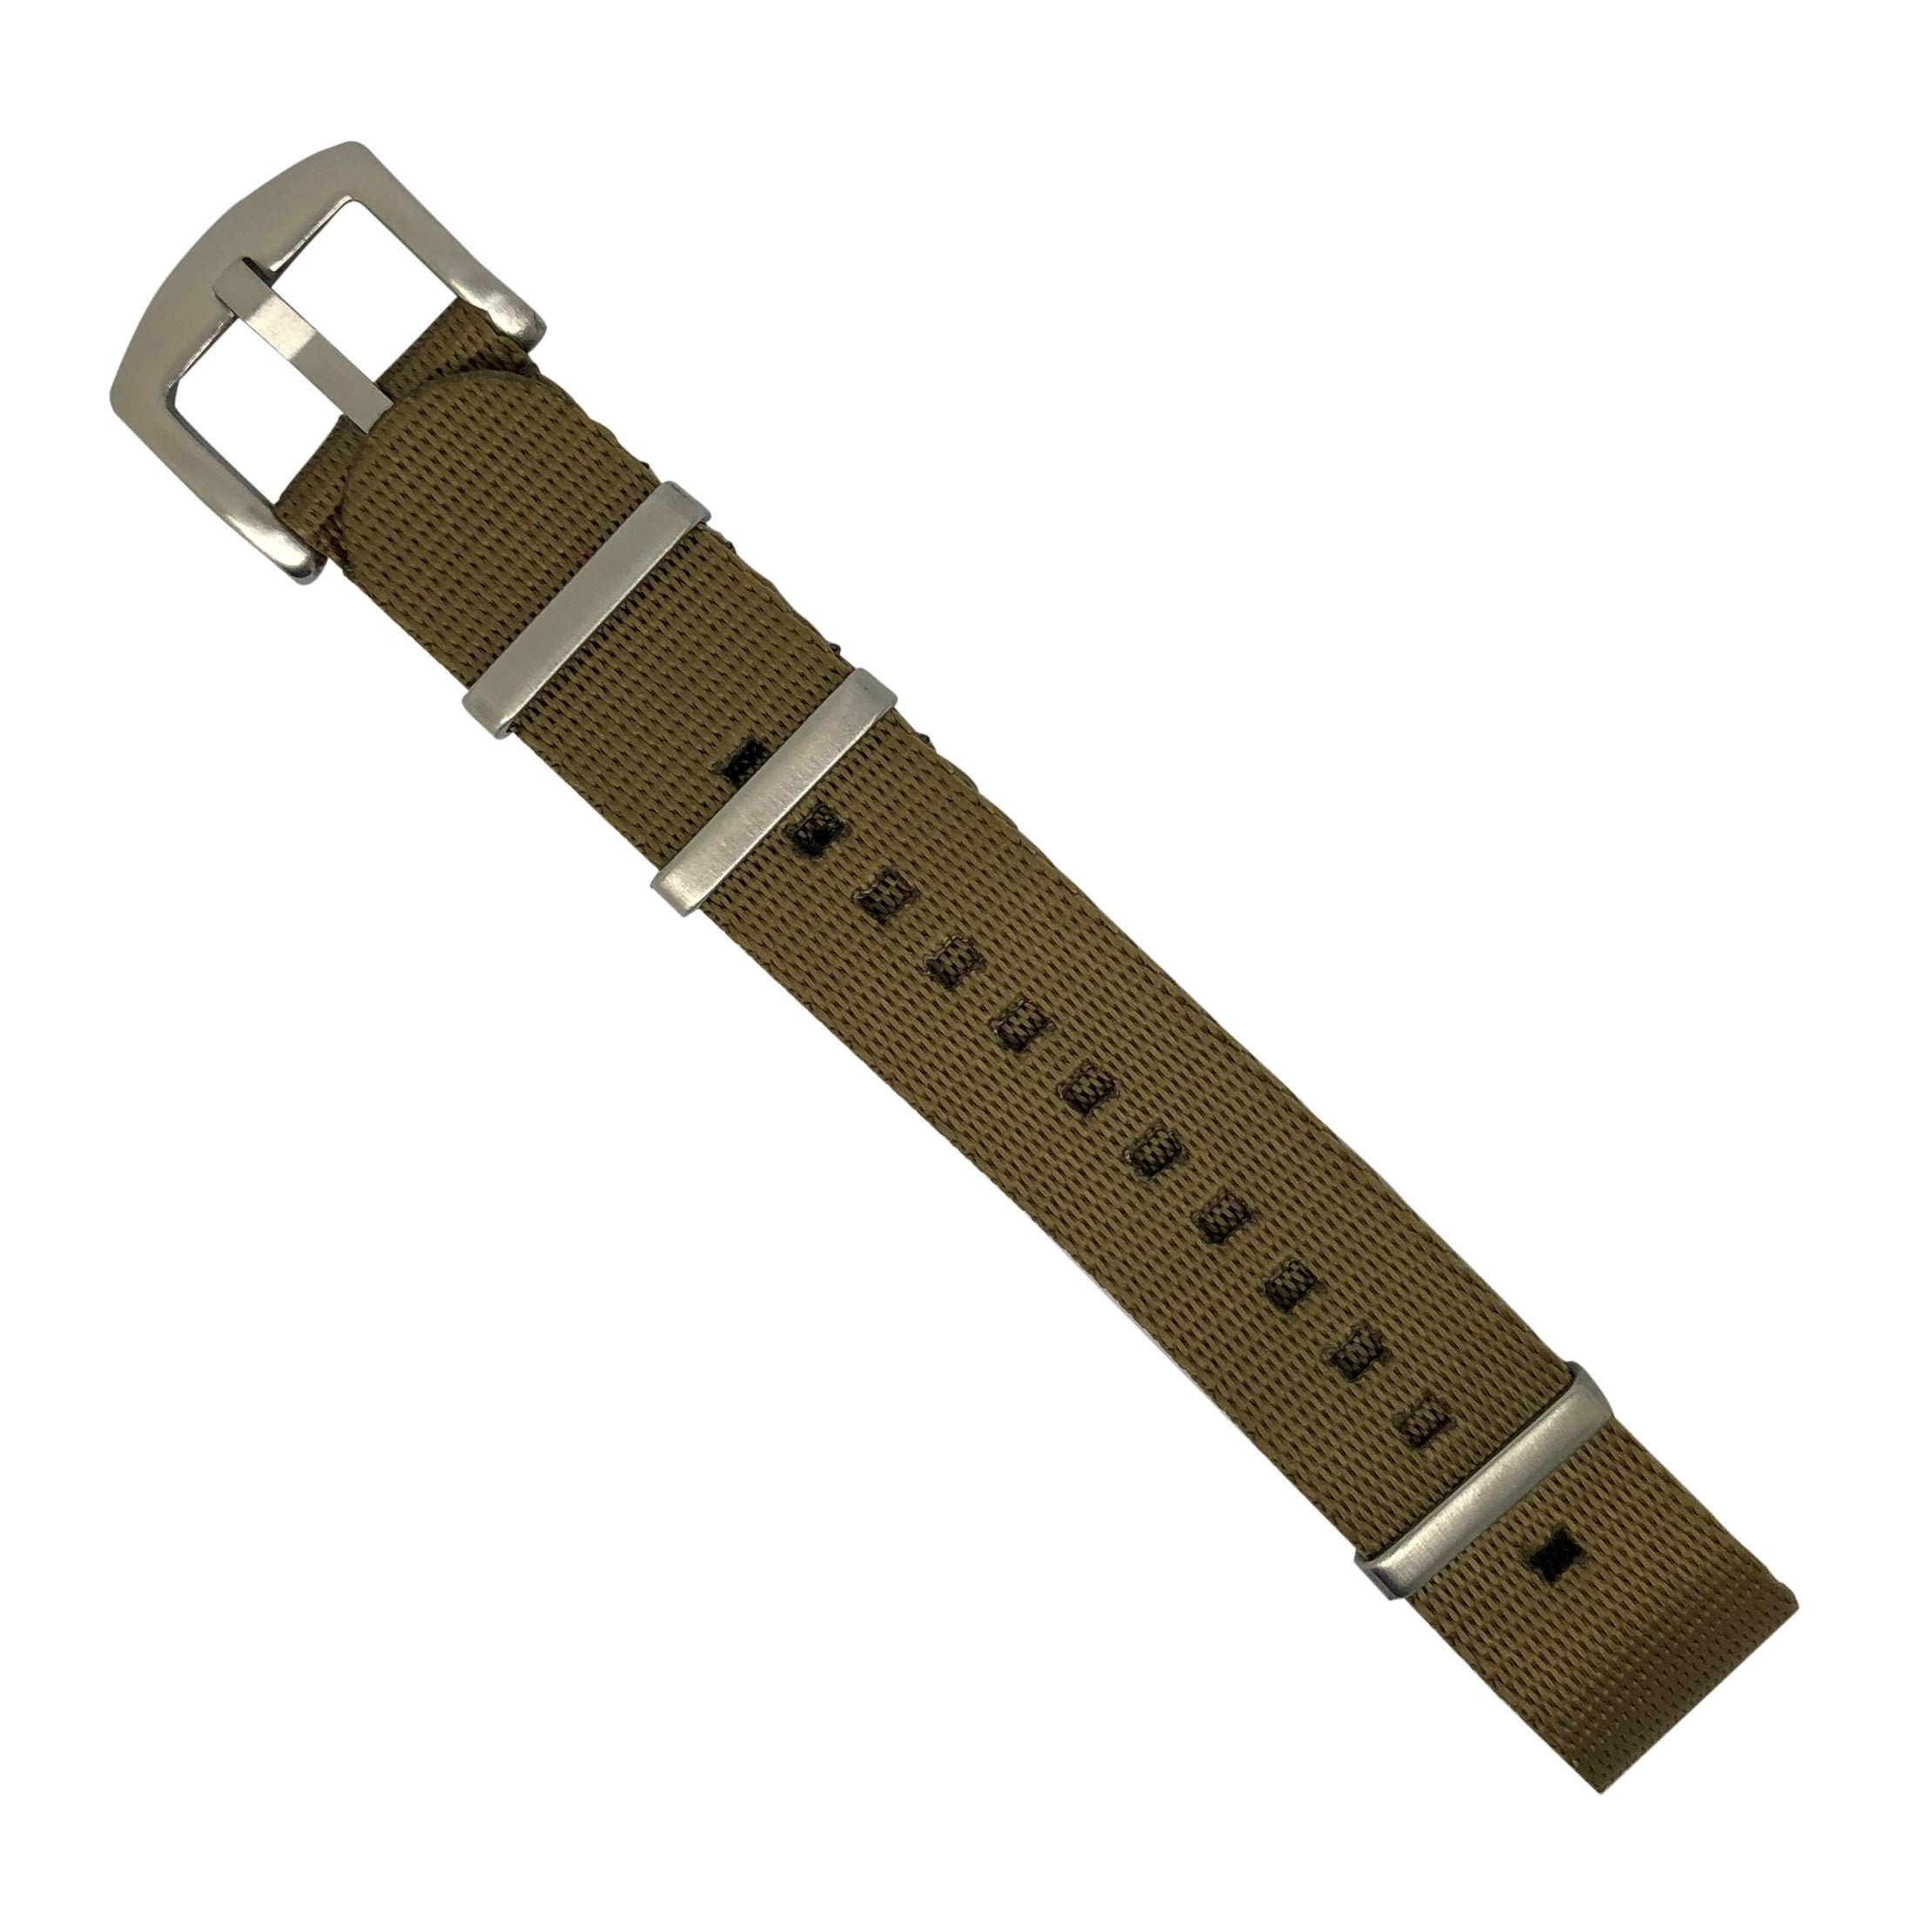 Seat Belt Nato Strap in Khaki with Brushed Silver Buckle (20mm) - Nomad watch Works